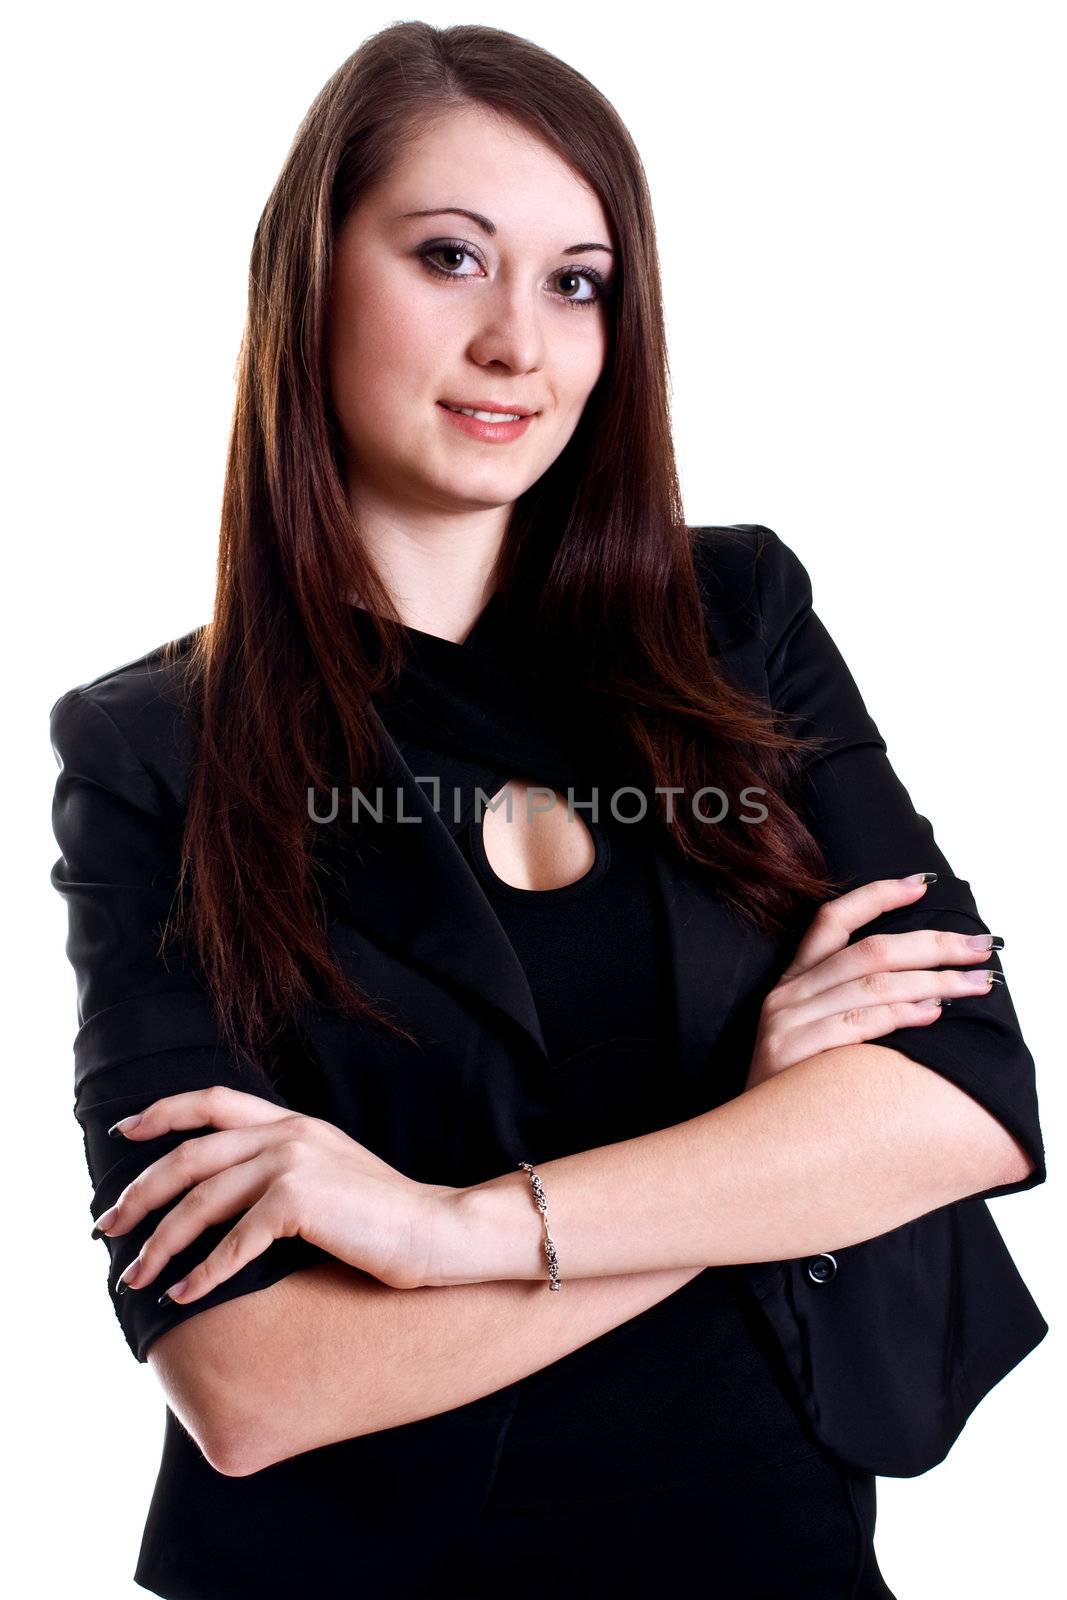 business woman in a suit on a white background